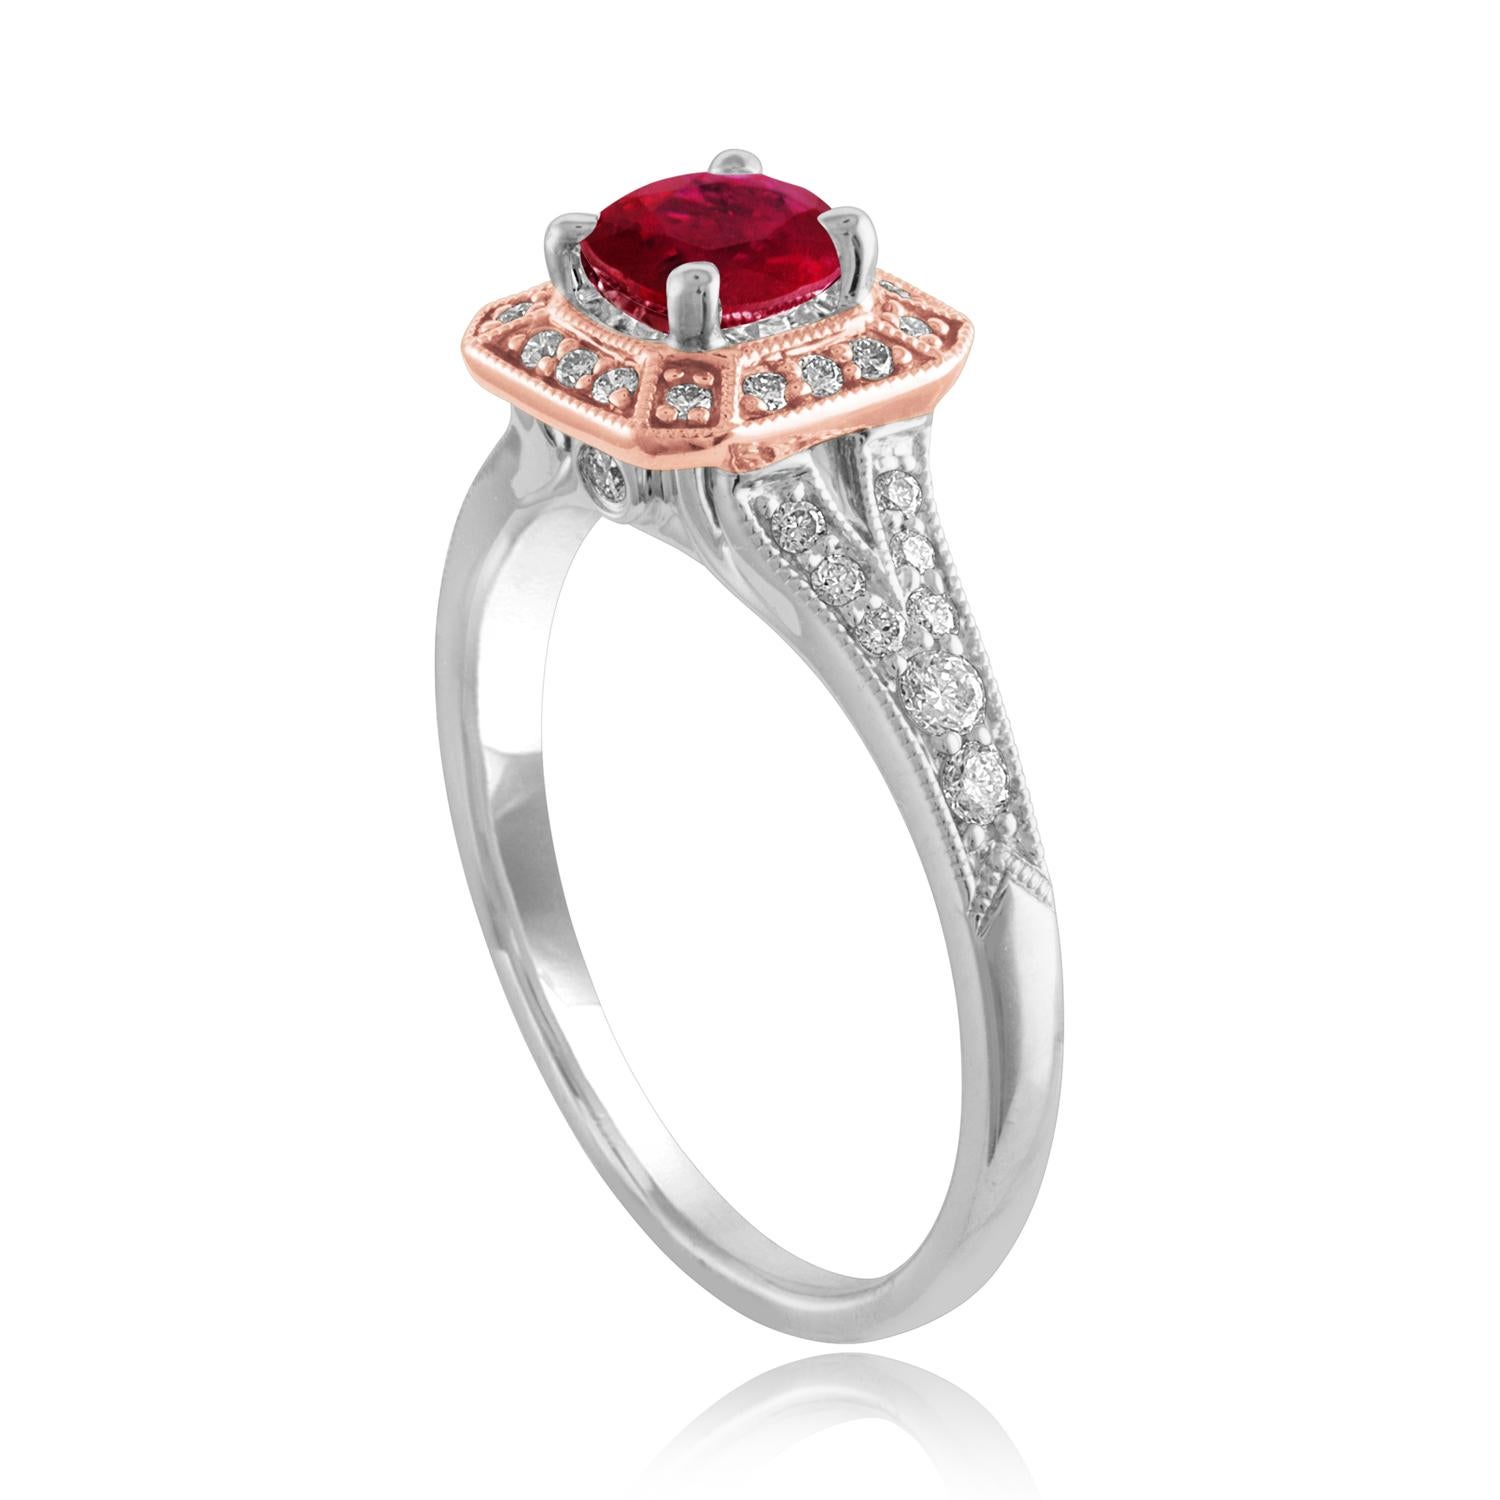 Beautiful Square Halo Two Tone Milgrain Ring
The ring is 18K White & Rose Gold
The Center Stone is a Round Ruby 0.88 Carats
The Ruby is AGL Certified Heated
There are 0.27 Carats in Diamonds F/G VS/SI
The ring is a size 6.75, sizable.
The ring